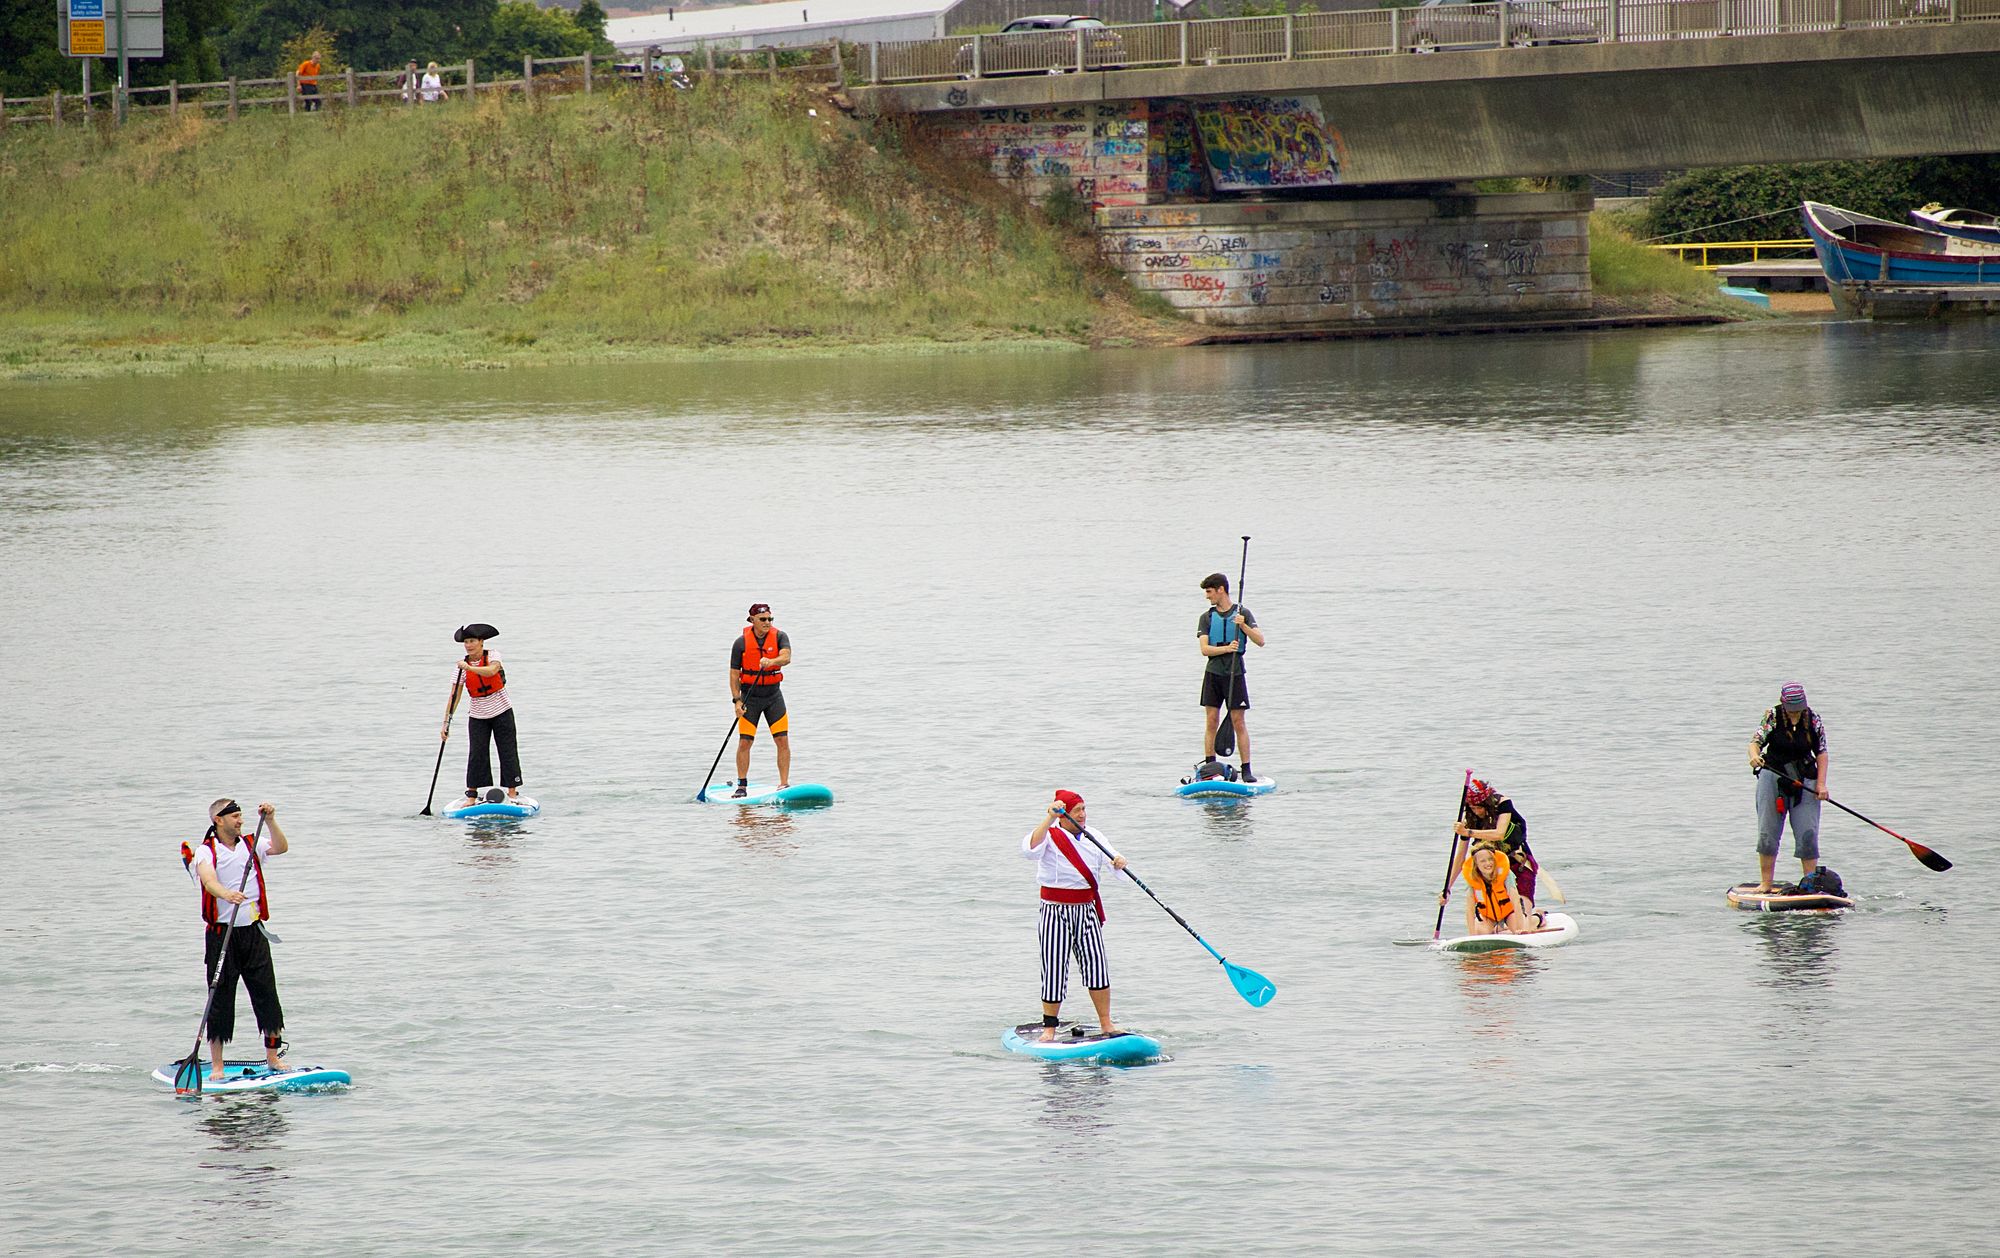 Gallery: Paddle-boarding Pirates